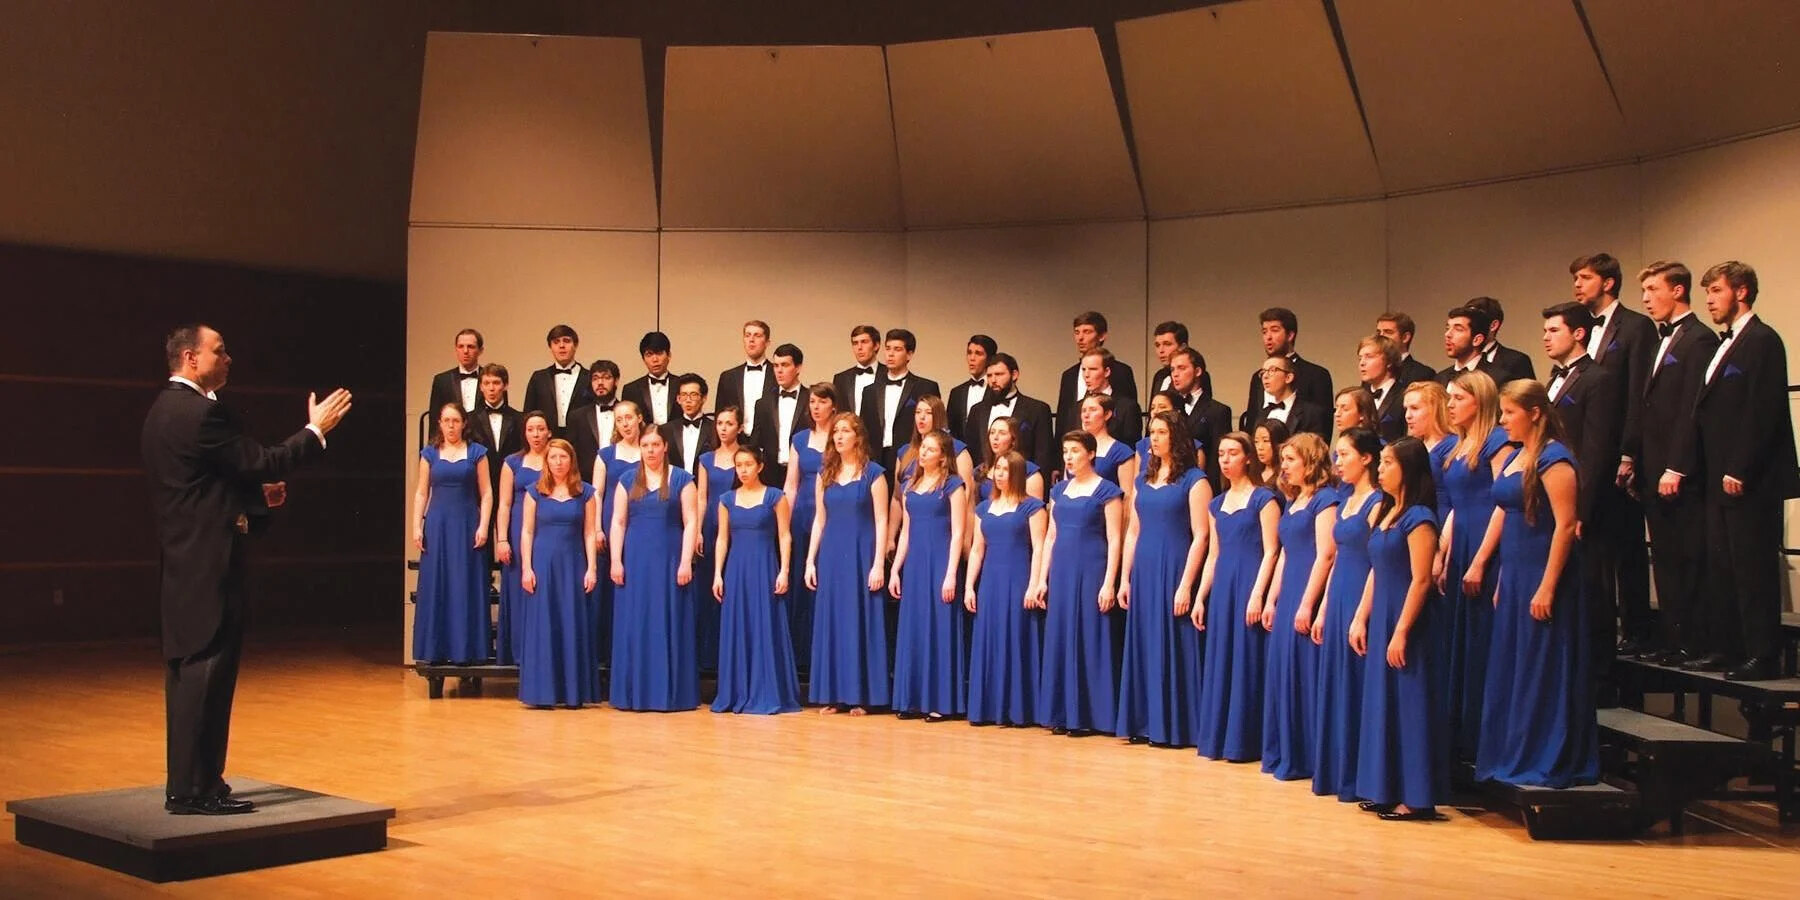 Seckman Middle Choir Director: Why To Join Choir